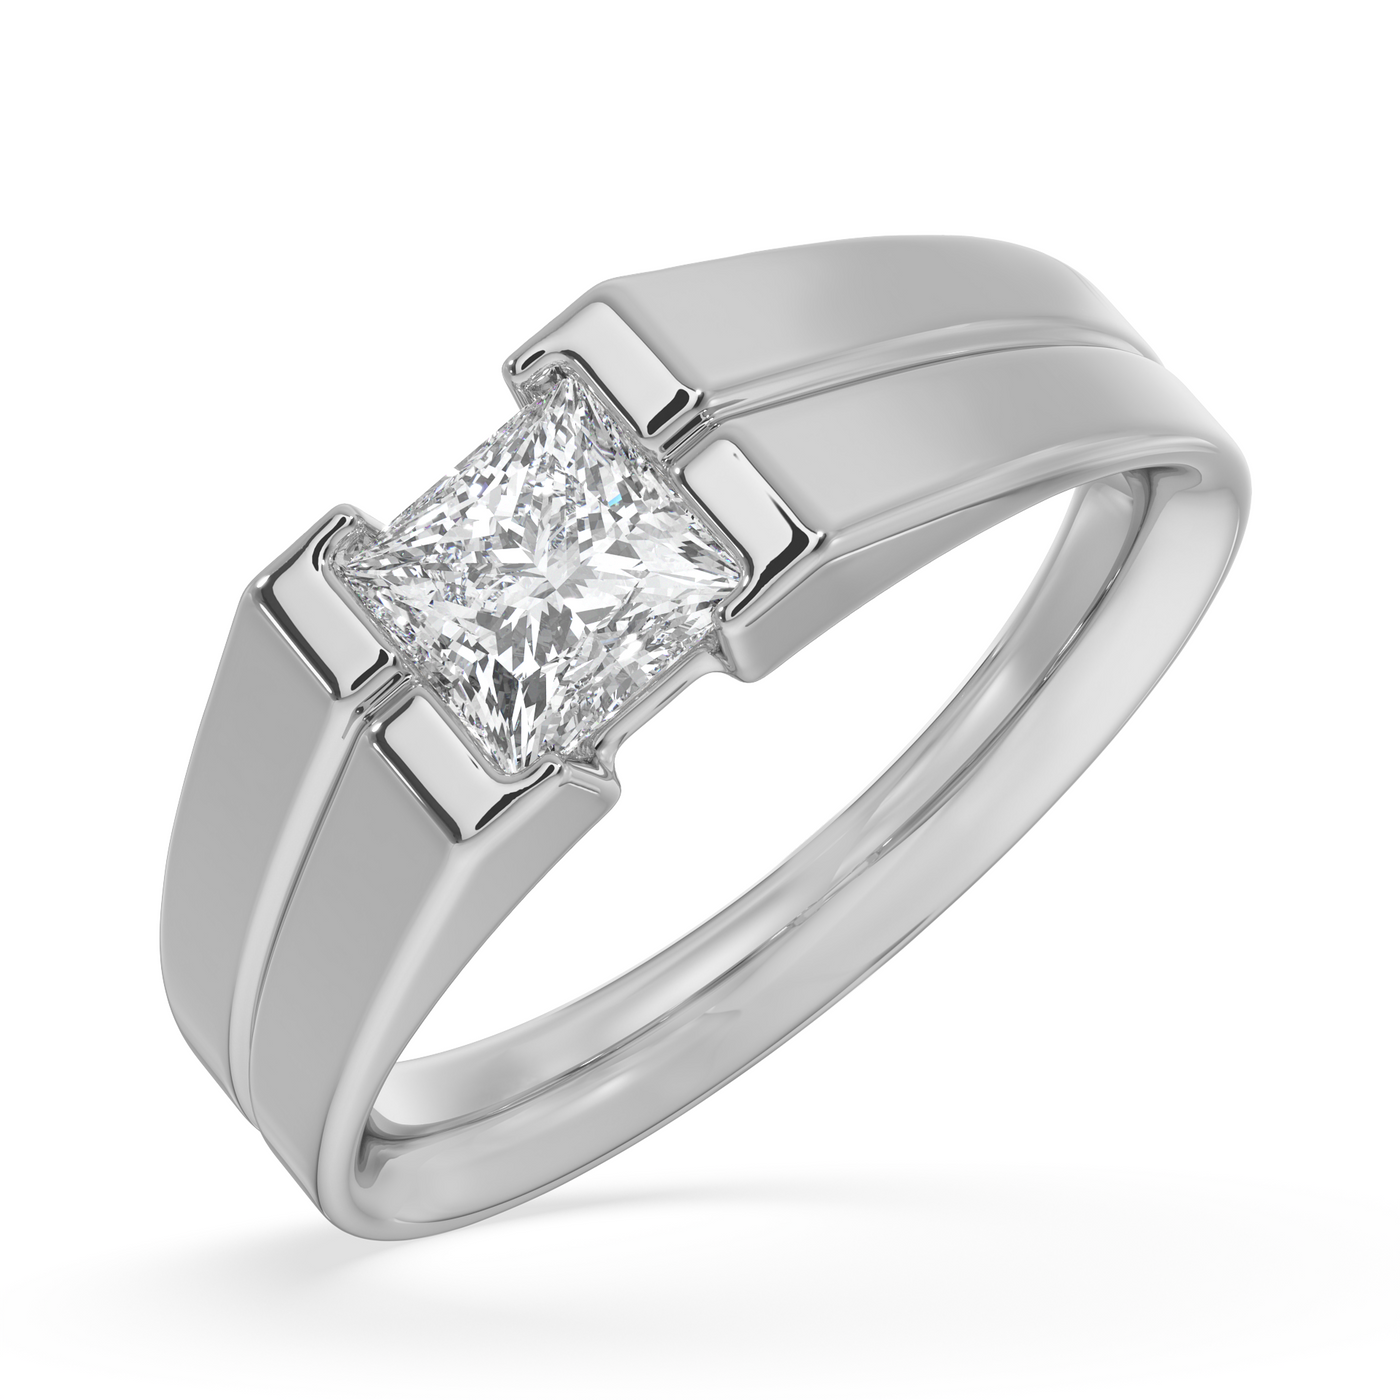 SY Men's Ring in Platinum, Majestic Solitaire